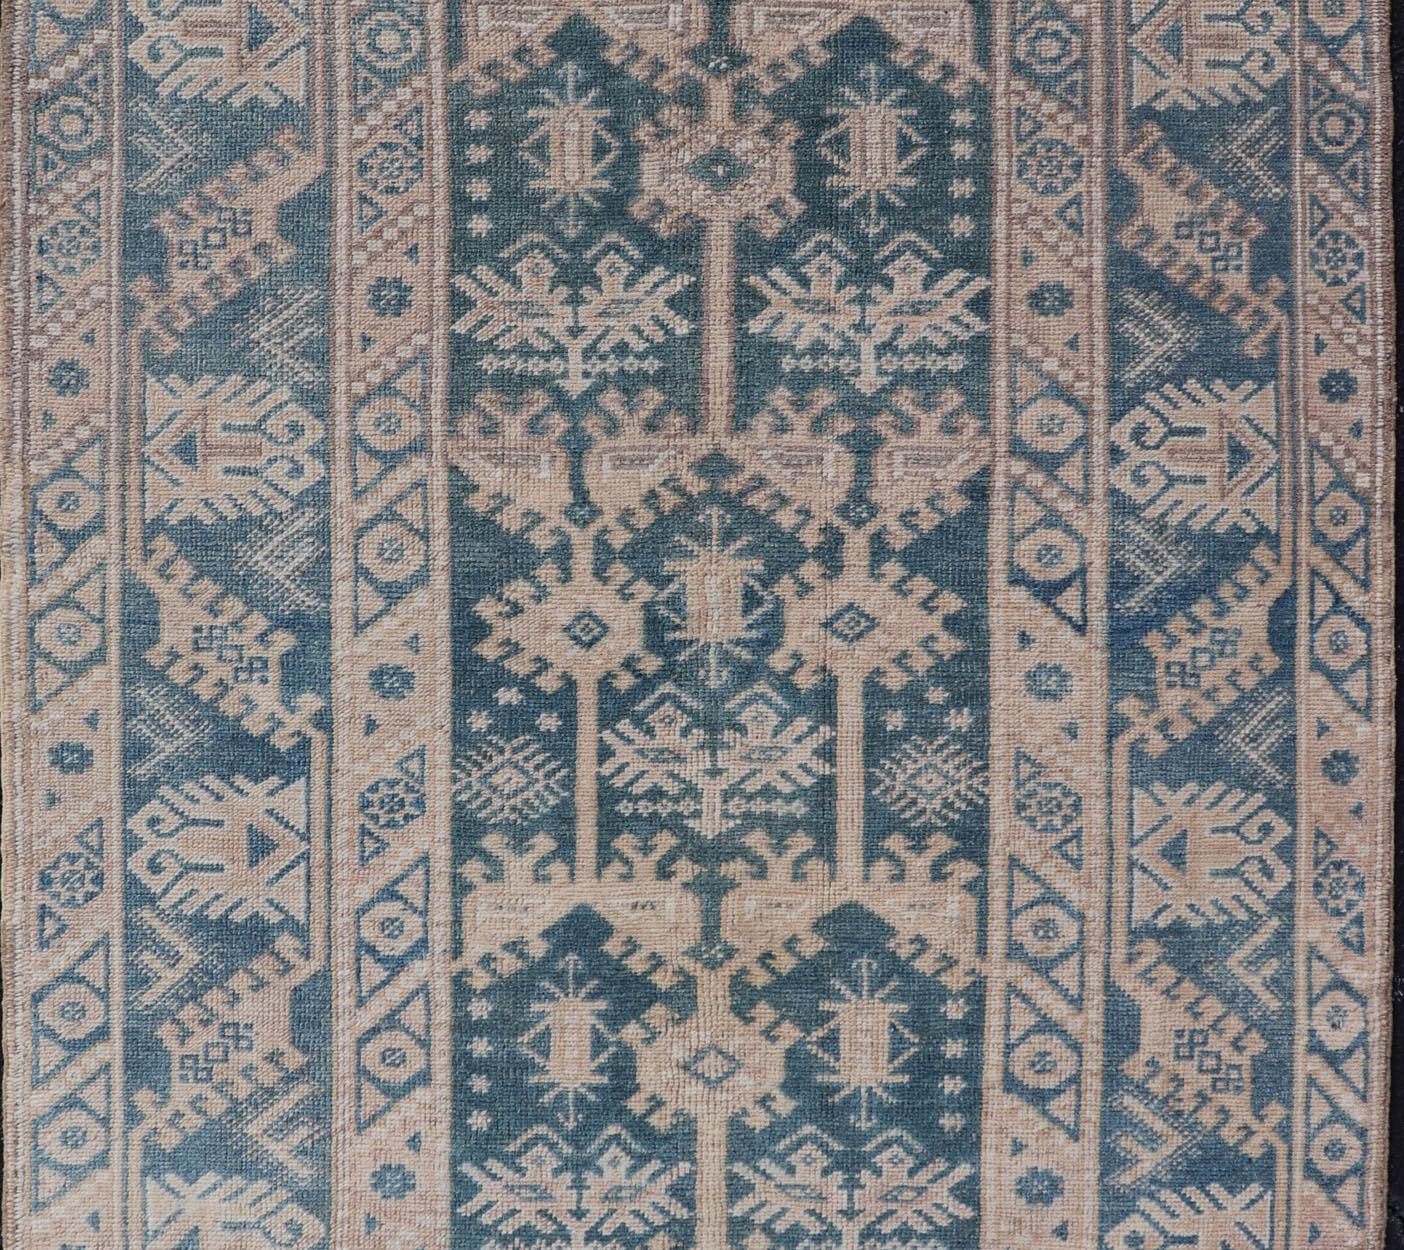 Blue and Cream Turkish Oushak Rug Vintage with All-Over Motif Design In Good Condition For Sale In Atlanta, GA